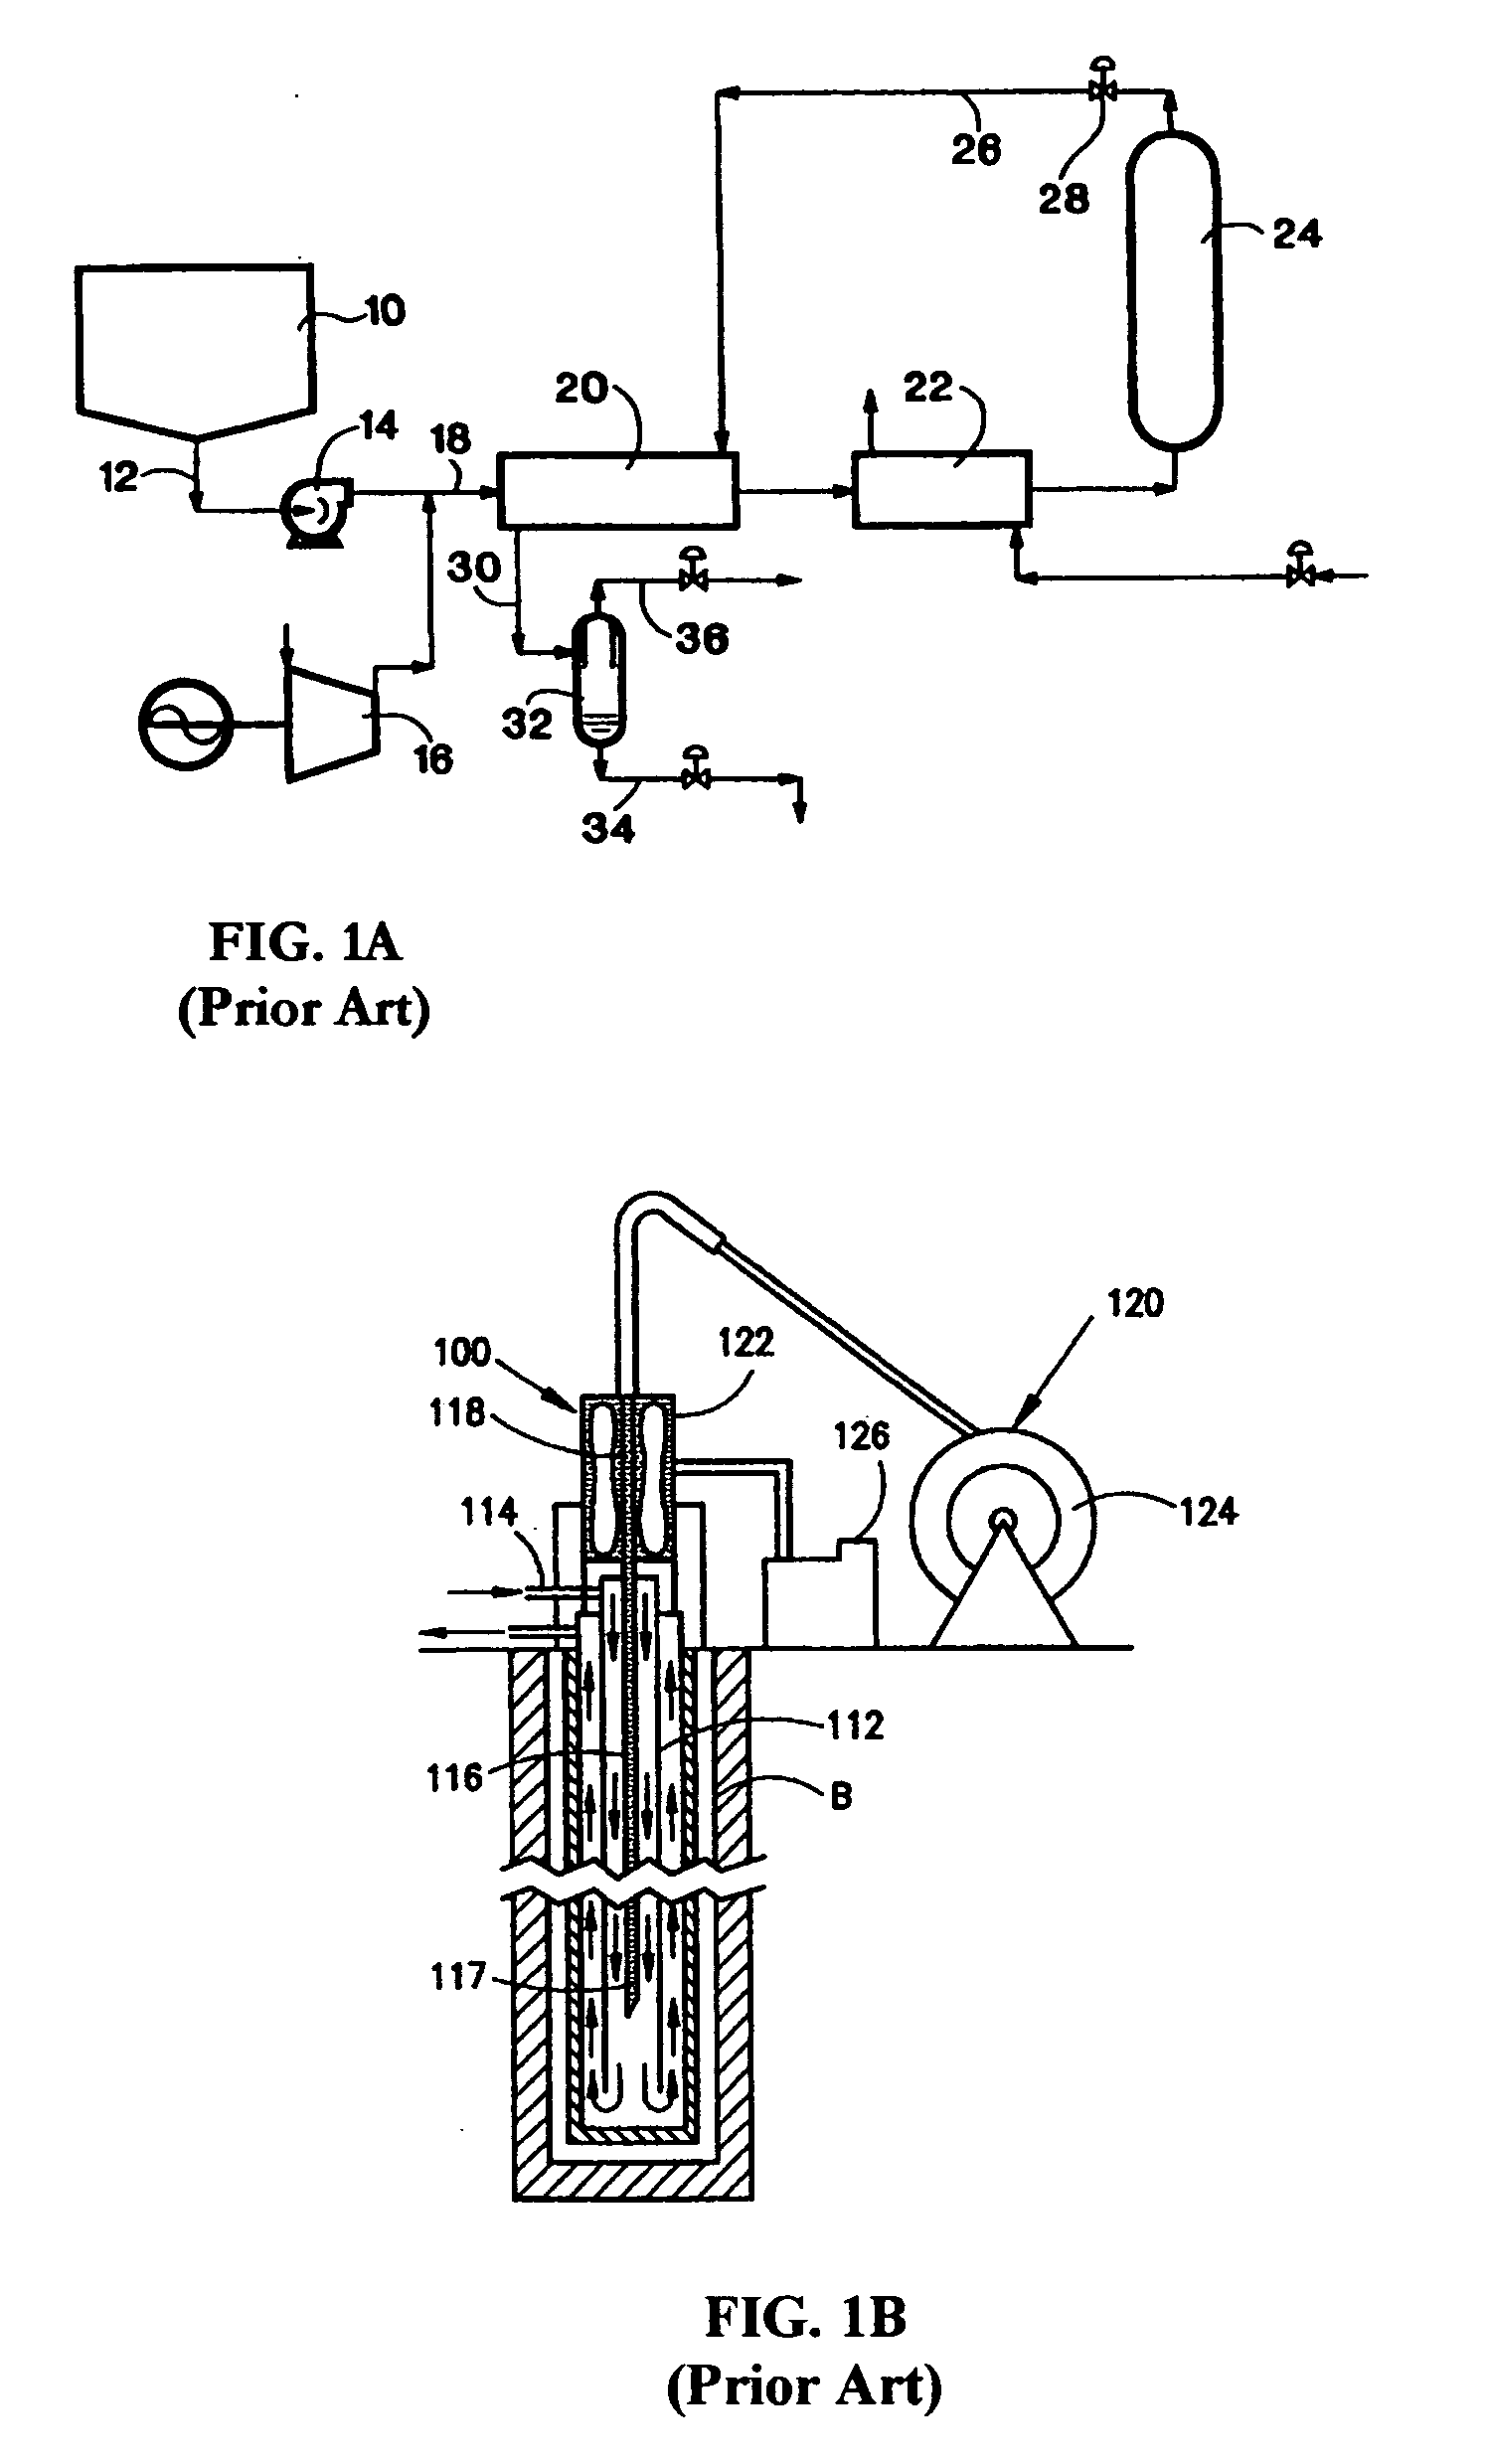 Waste disposal method and apparatus using wet oxidation and deep well injection